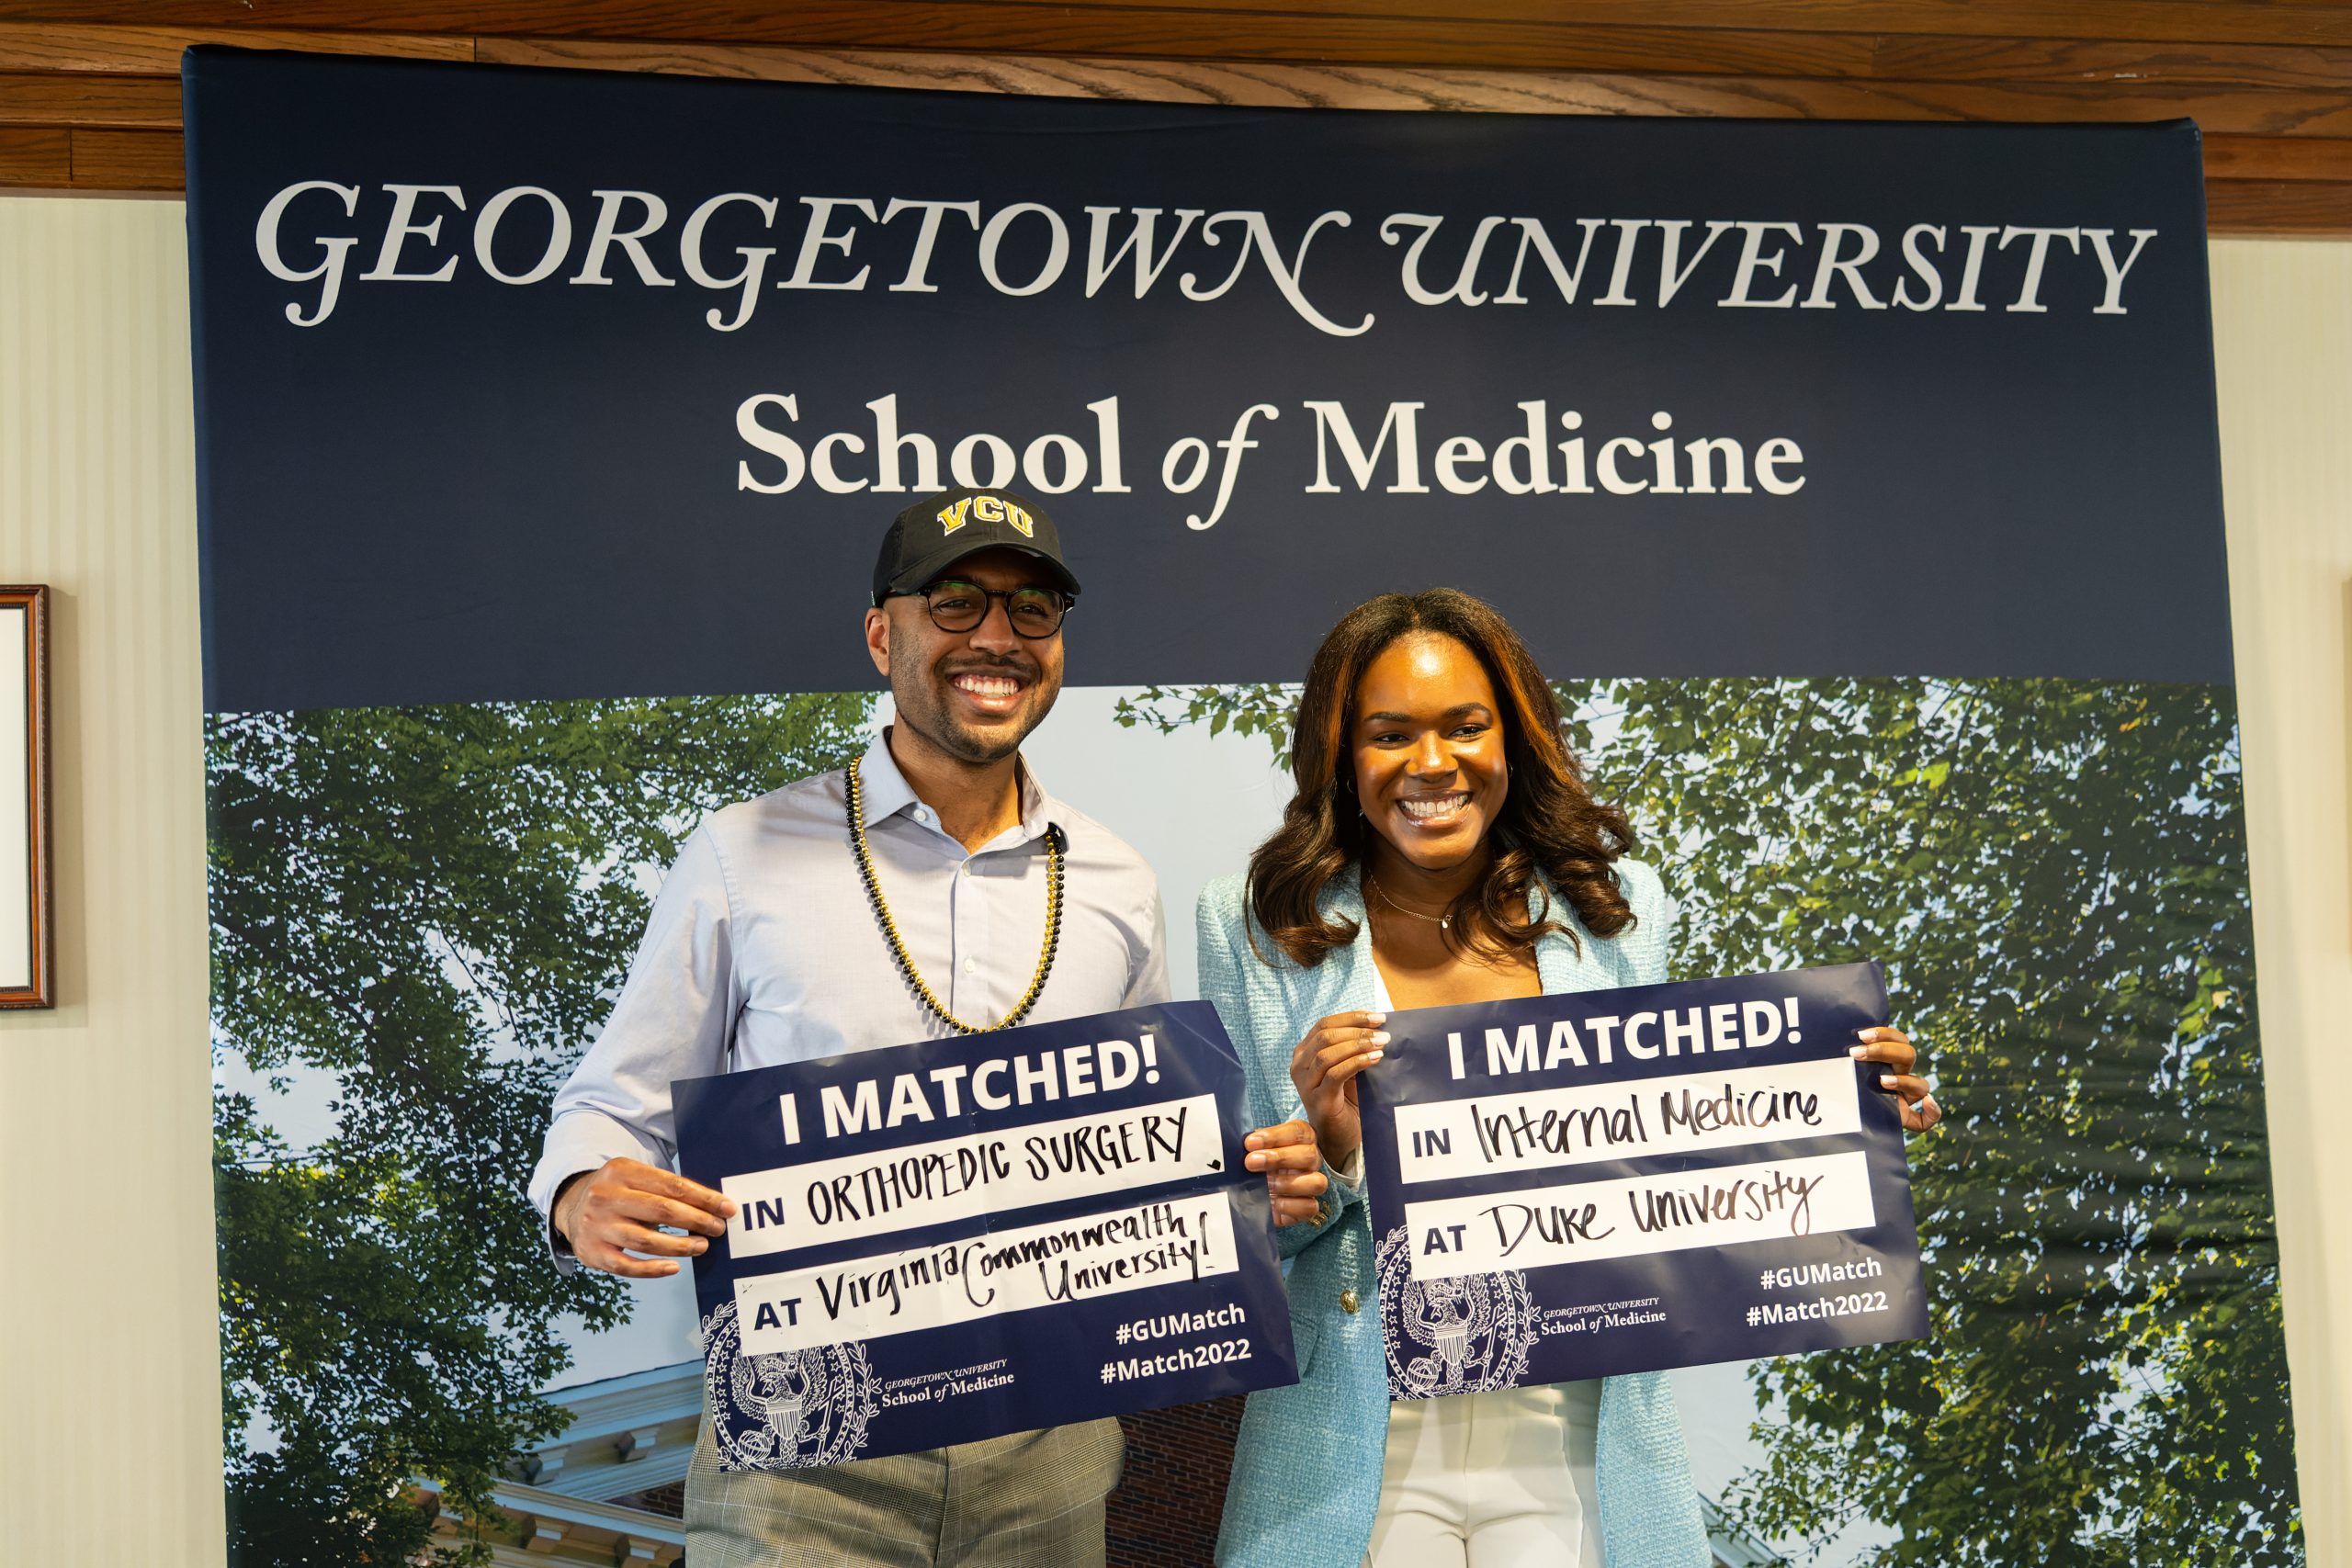 Members of the School of Medicine Class of 2022 gather to celebrate Match Day.